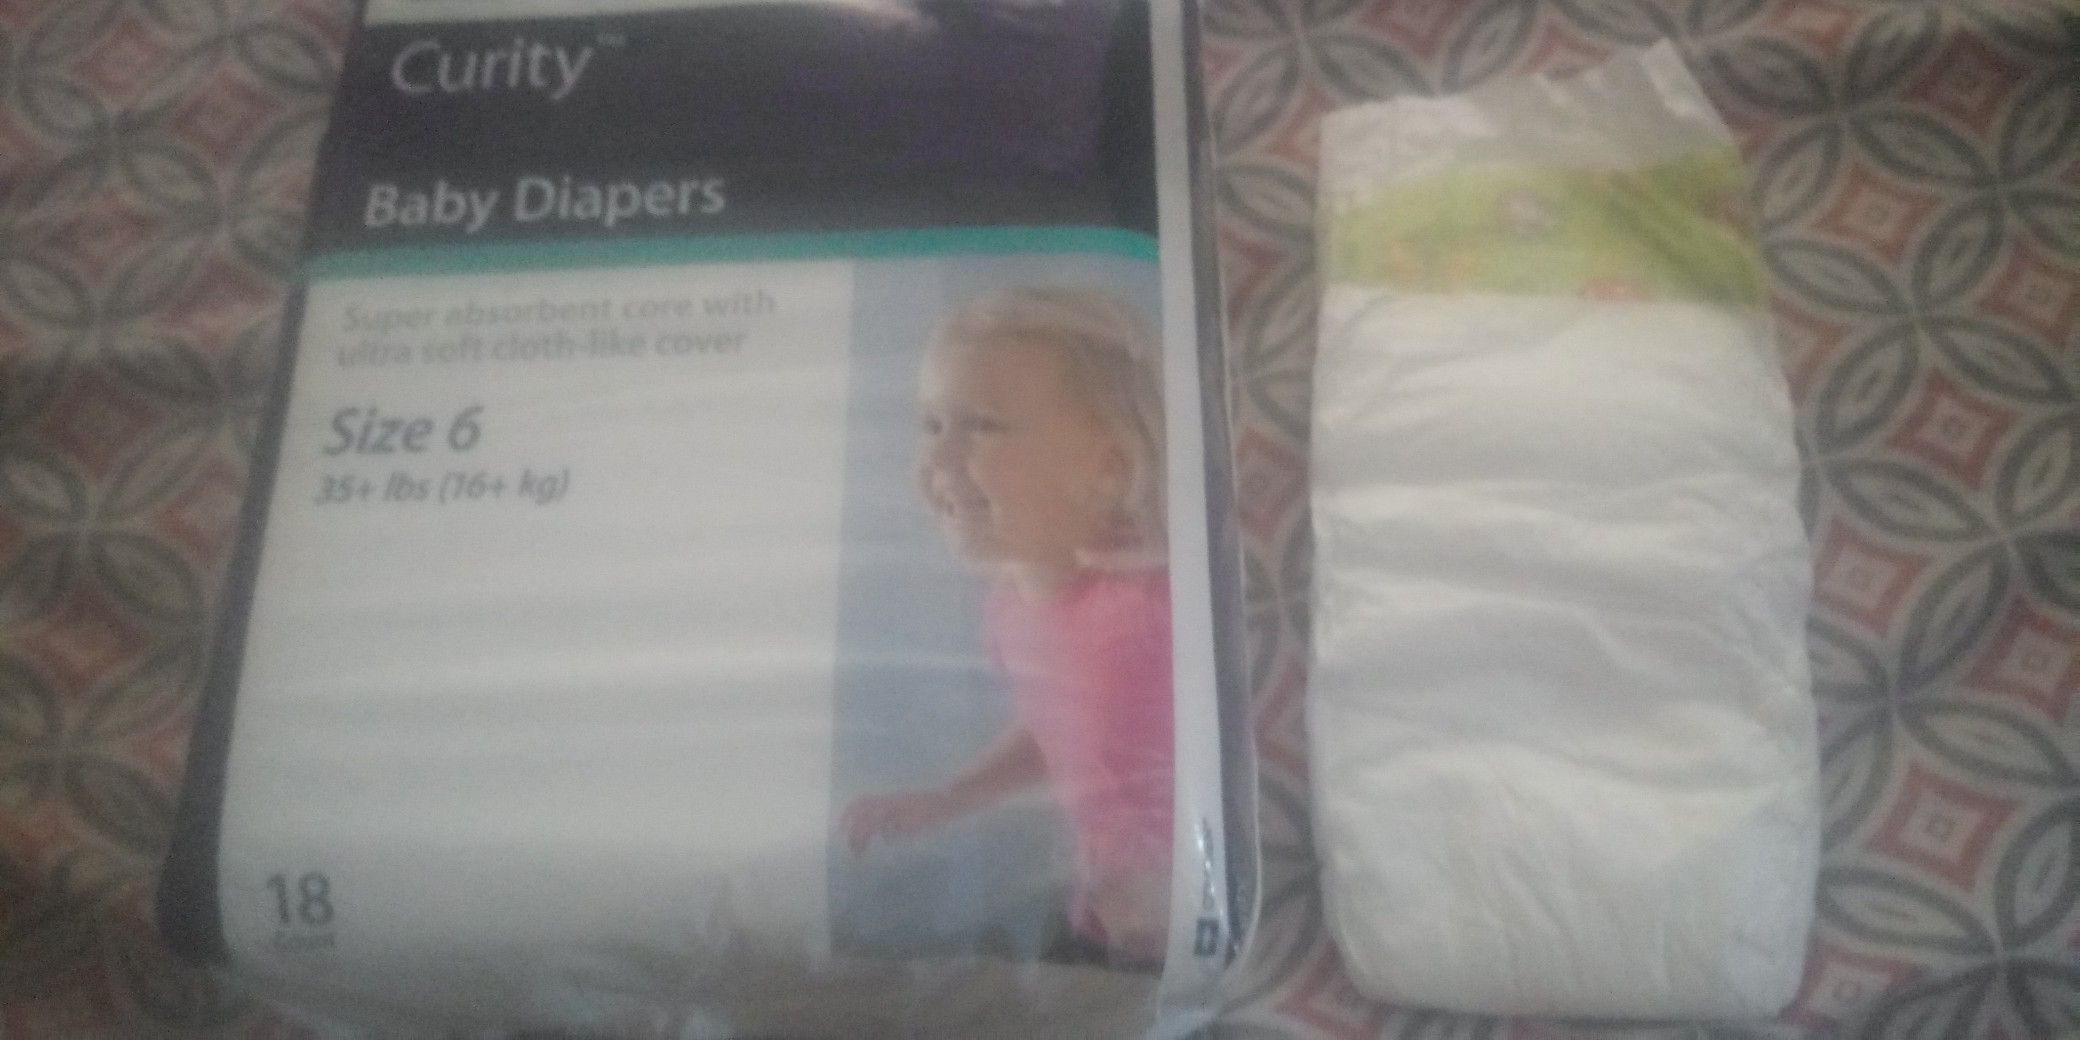 Diapers size 6 of 18 count